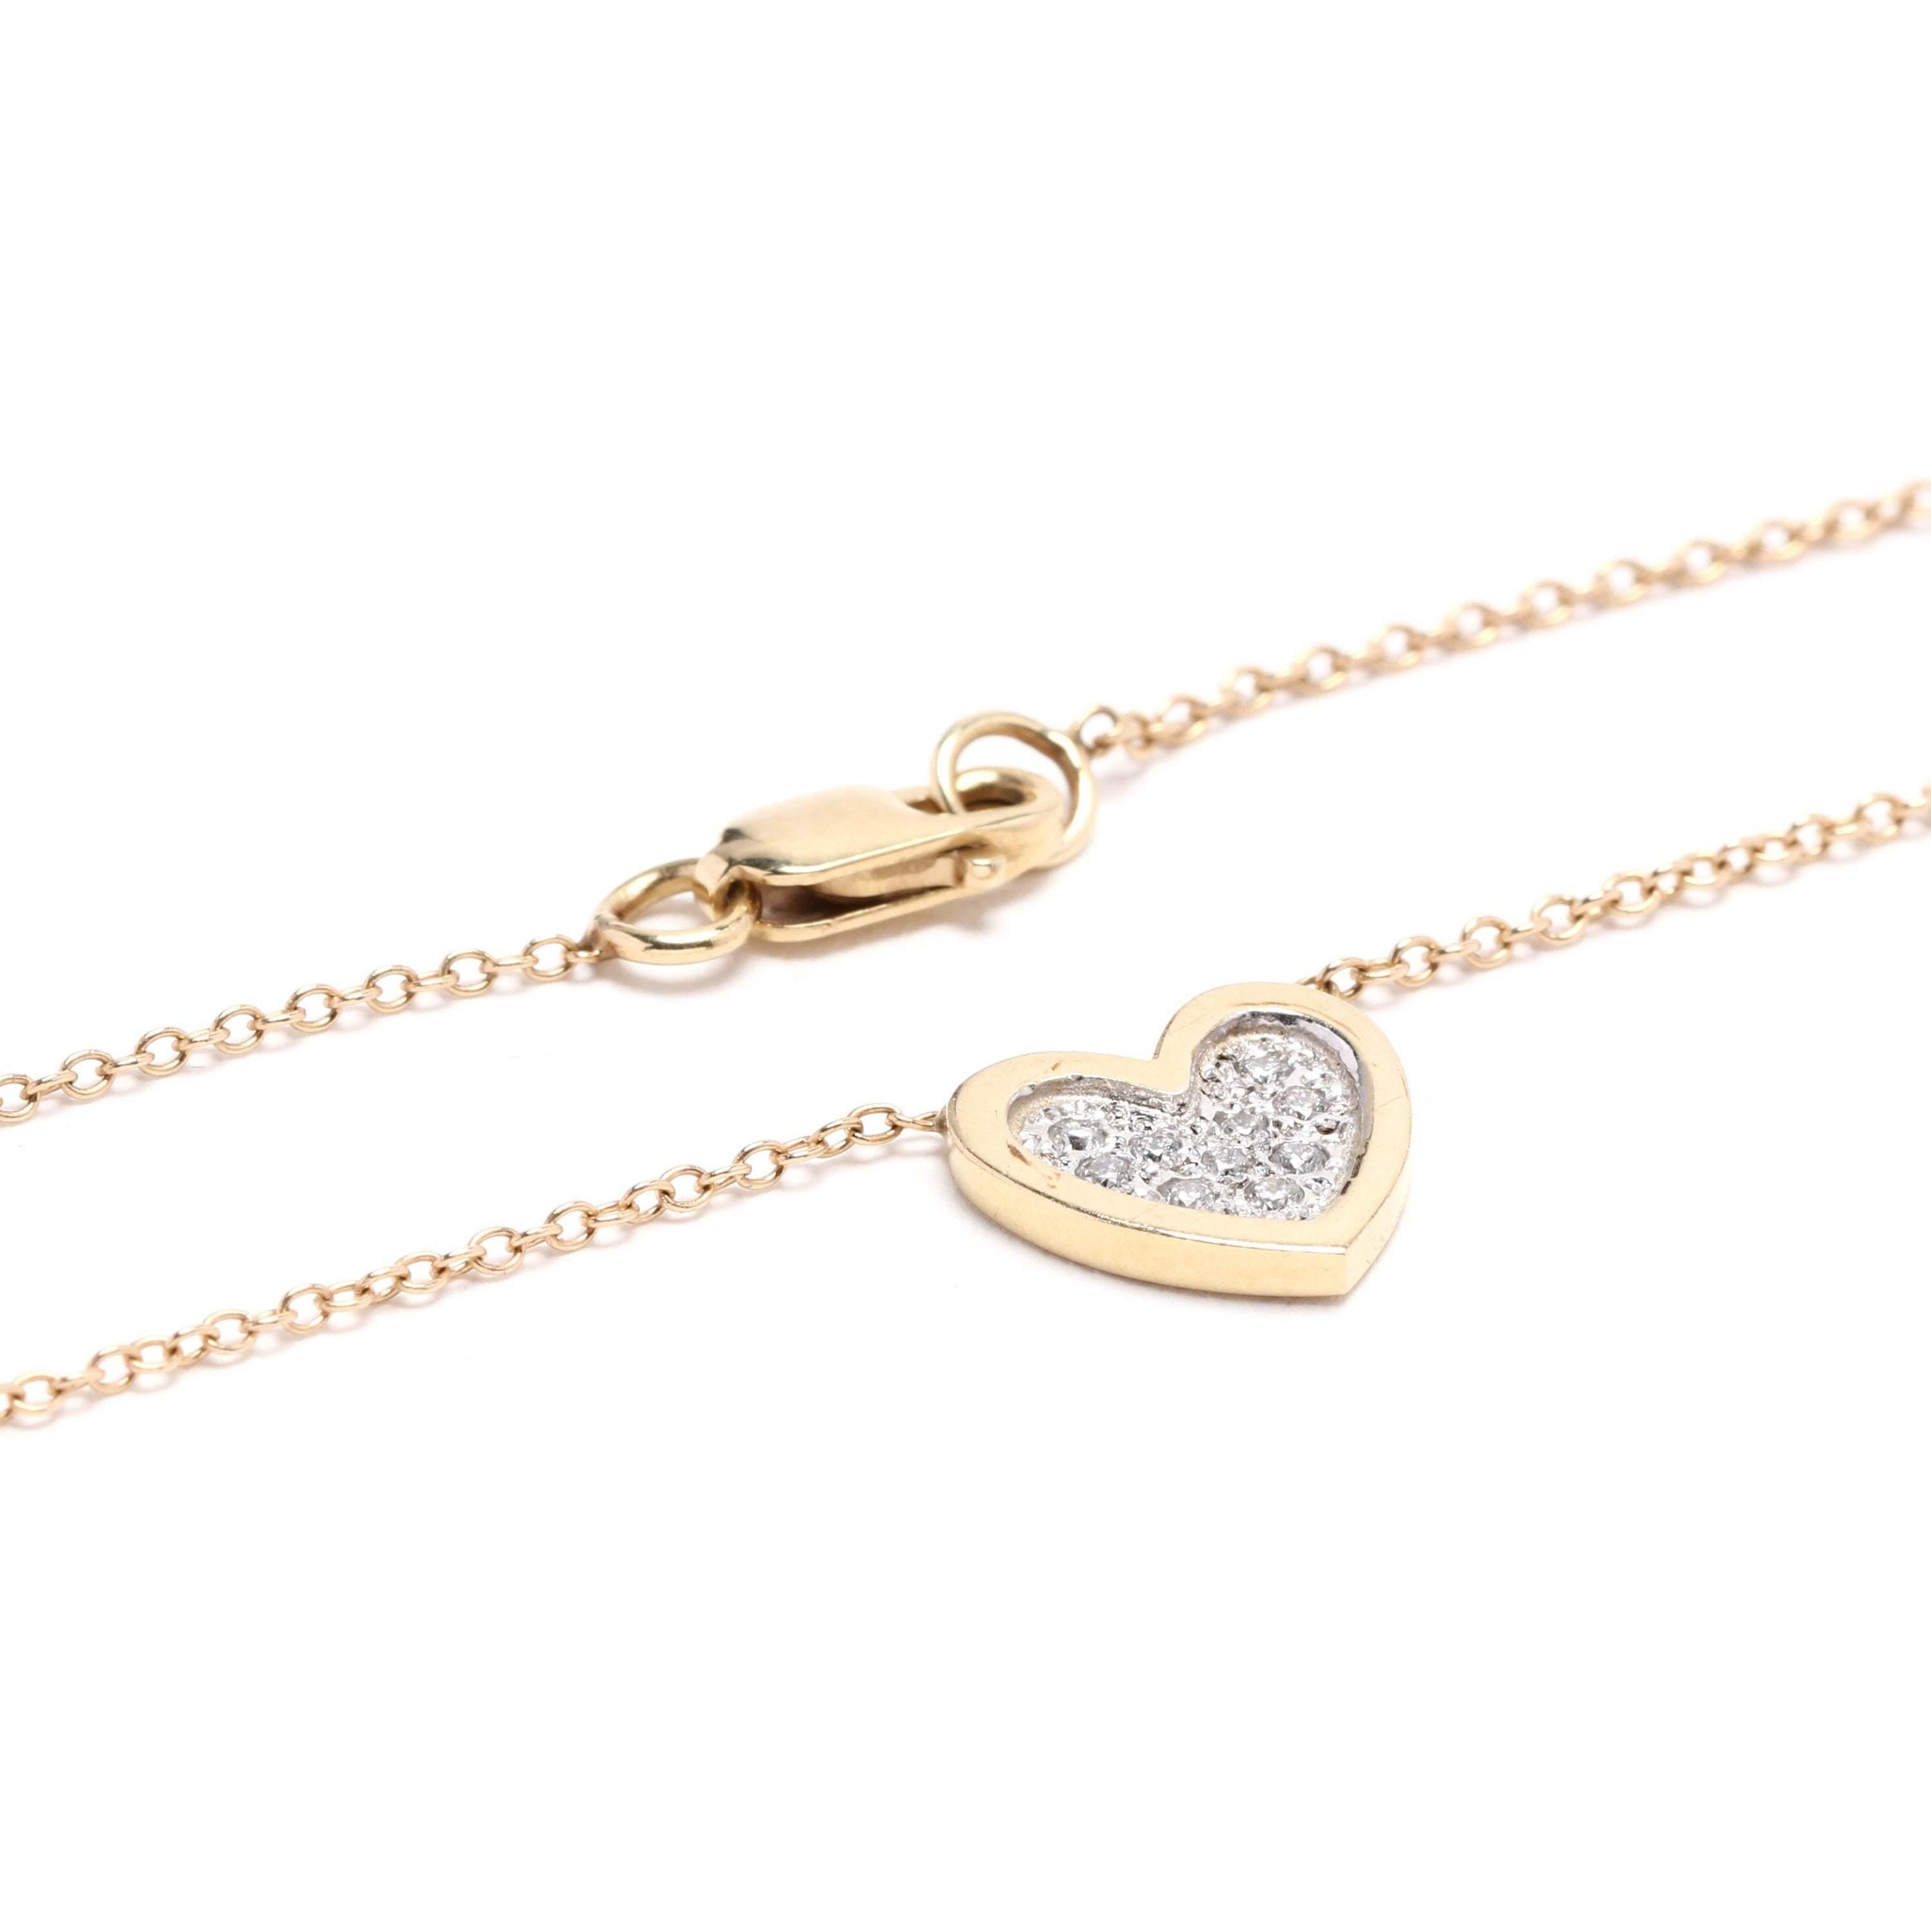 14k yellow and white gold diamond heart necklace. A timeless symbol of love, this necklace is a classic cable with a heart-shaped pendant. The pendant has a yellow gold edge and the center features diamonds set in white gold. This would make a great